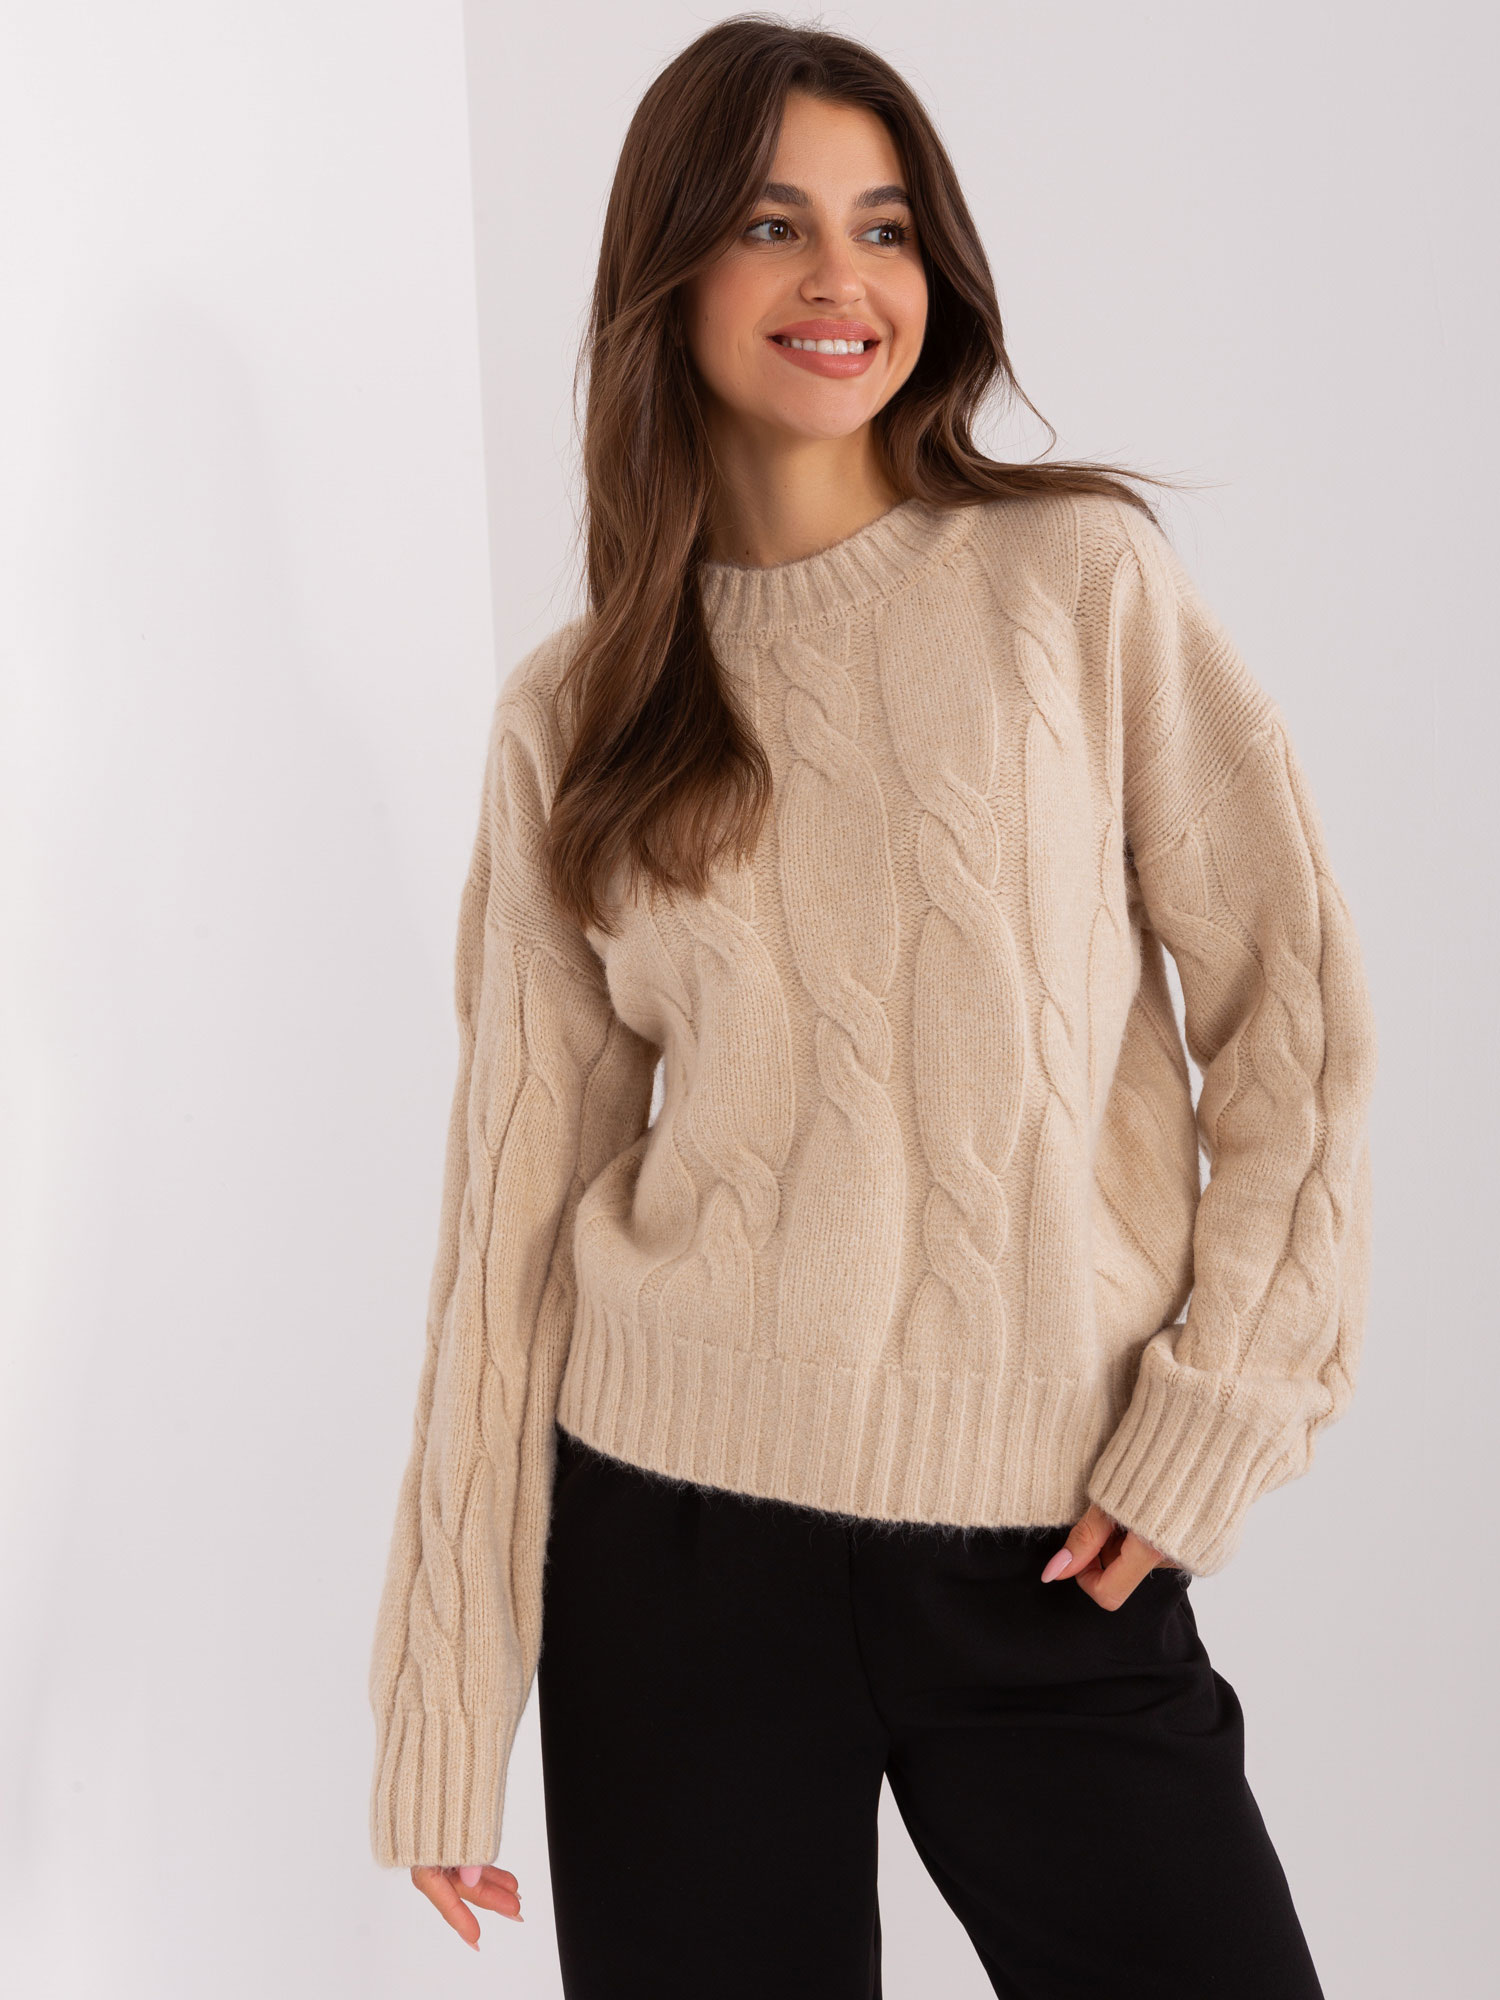 Light beige classic sweater with cables